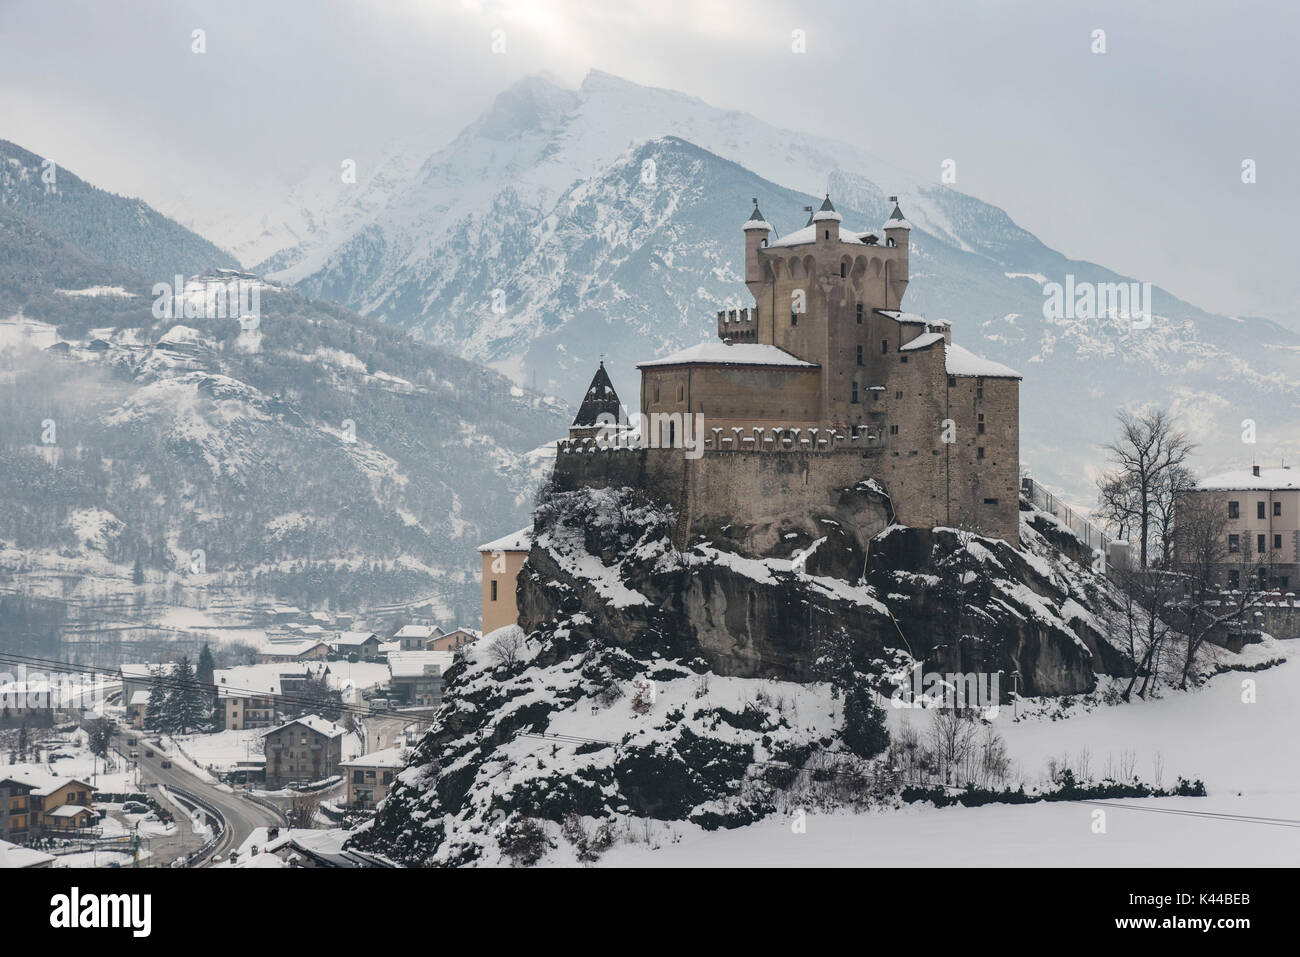 Castle of Saint Pierre with snow. Saint-Pierre, province of Aosta, Aosta Valley, Italy Stock Photo